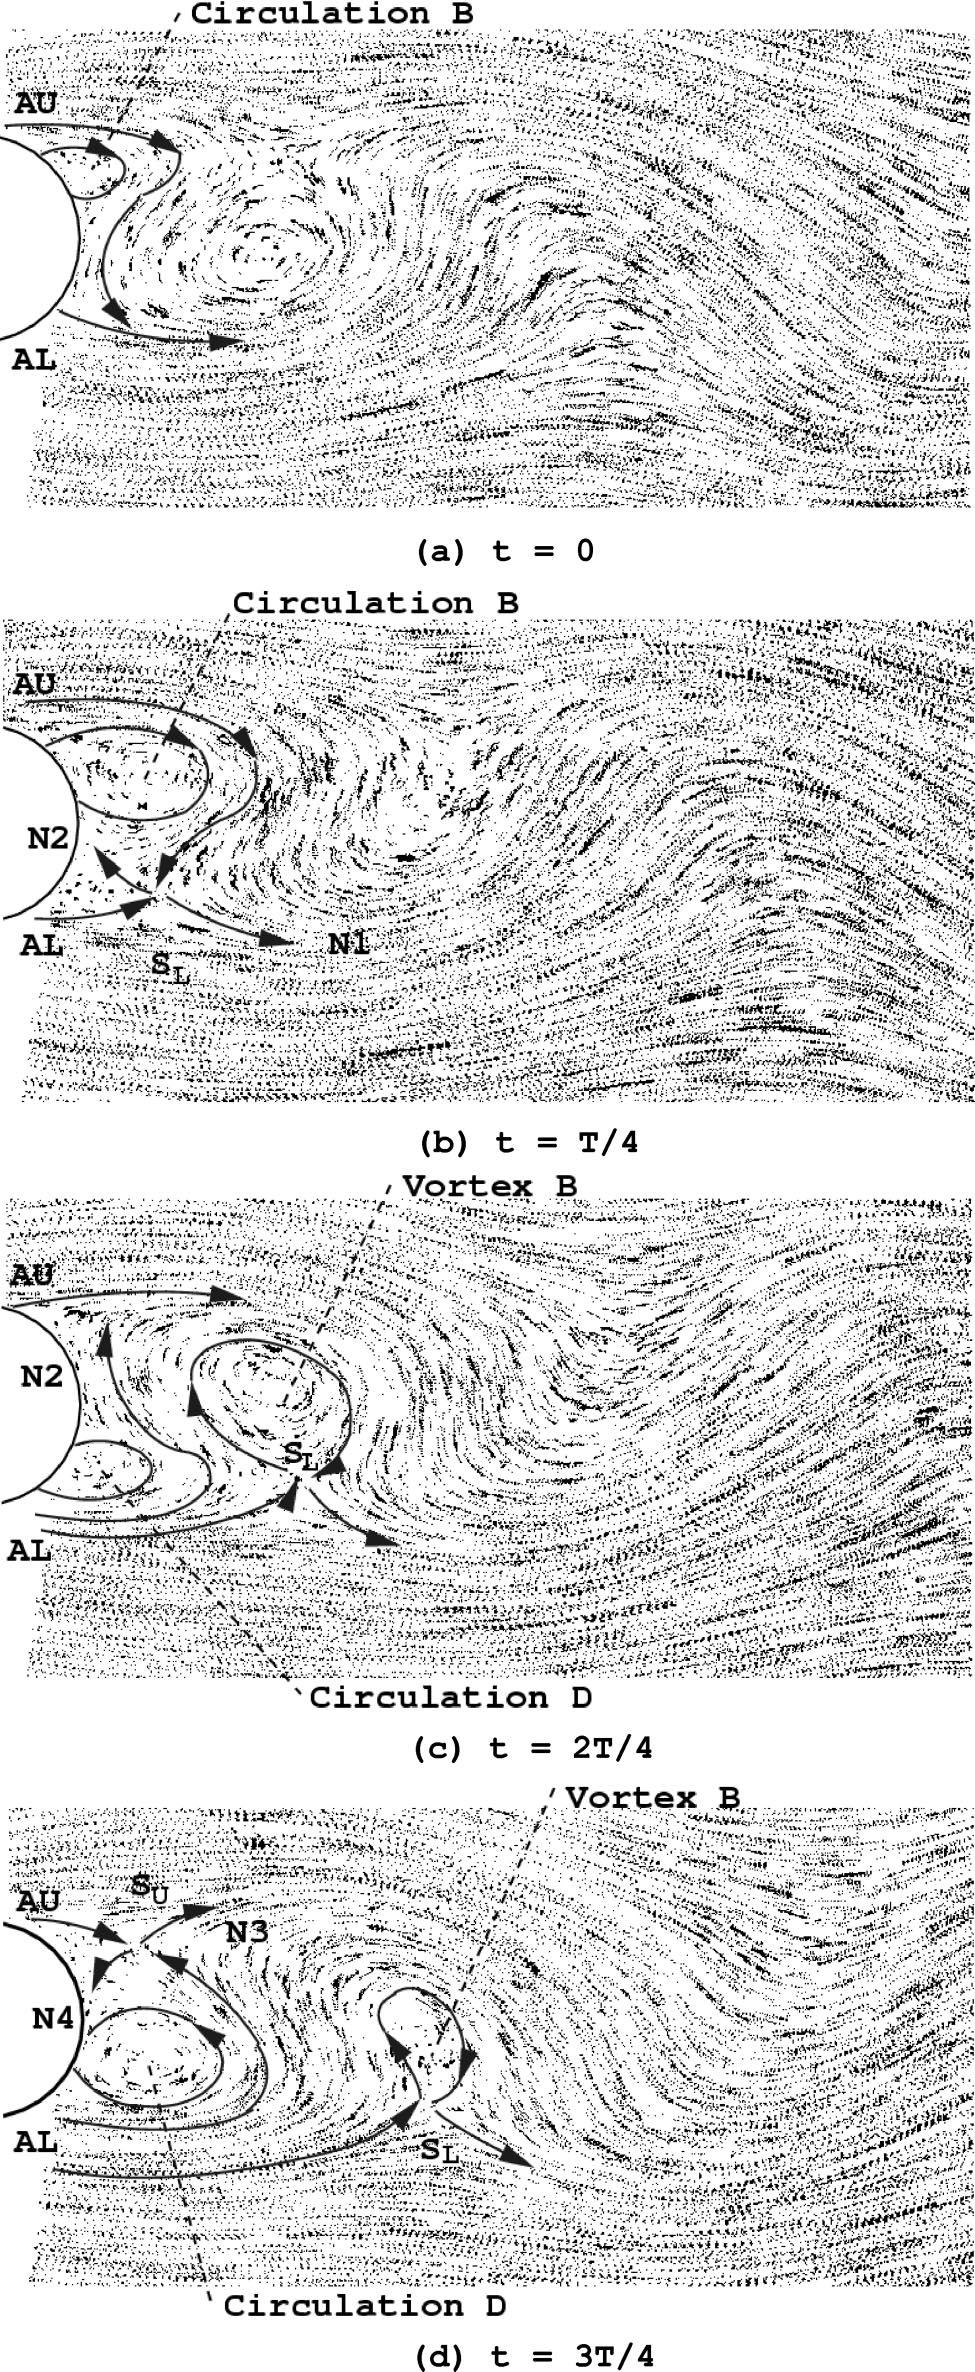 Phys. Fluids, Vol. 16, No. 8, August 2004 Experimental and numerical investigation of the vortex 3107 FIG. 6. Side view of the wake flow at Re 117 and various Richardson numbers.